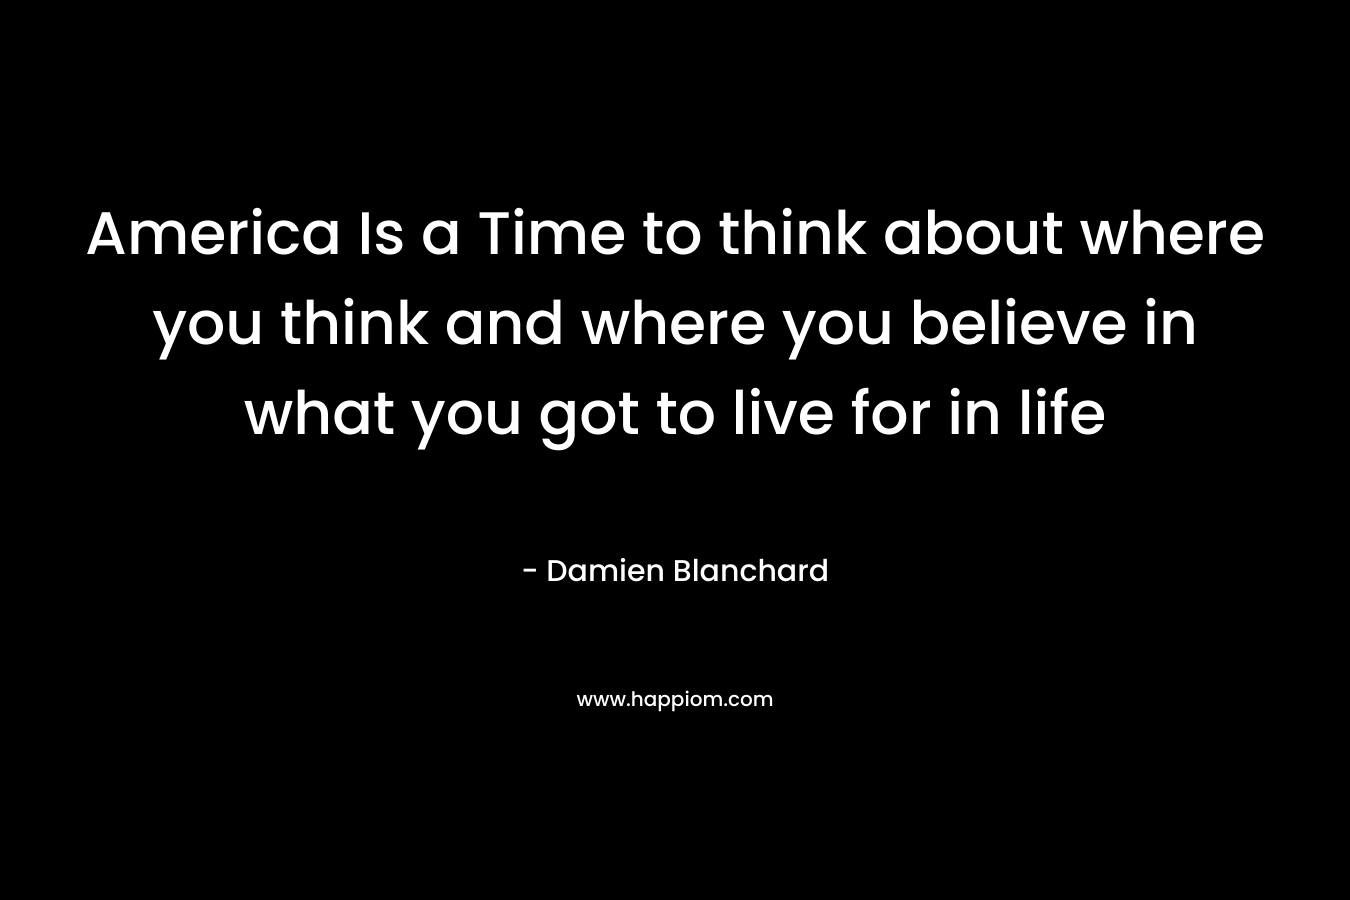 America Is a Time to think about where you think and where you believe in what you got to live for in life